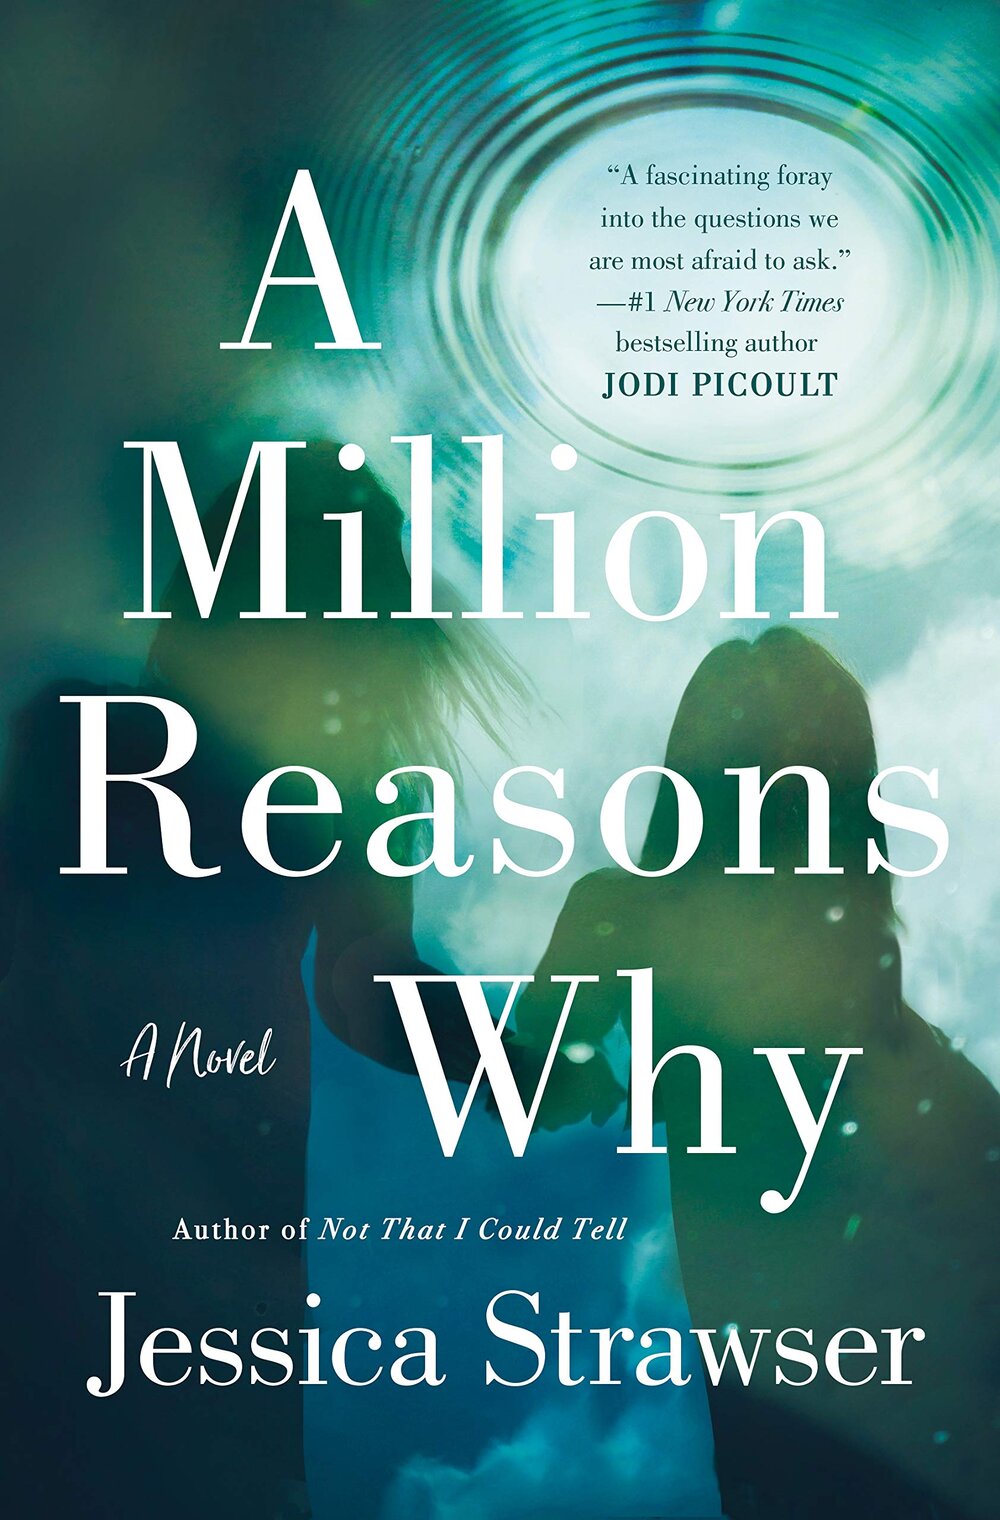 book it_most anticipated books of 2021_a million reasons why.jpg